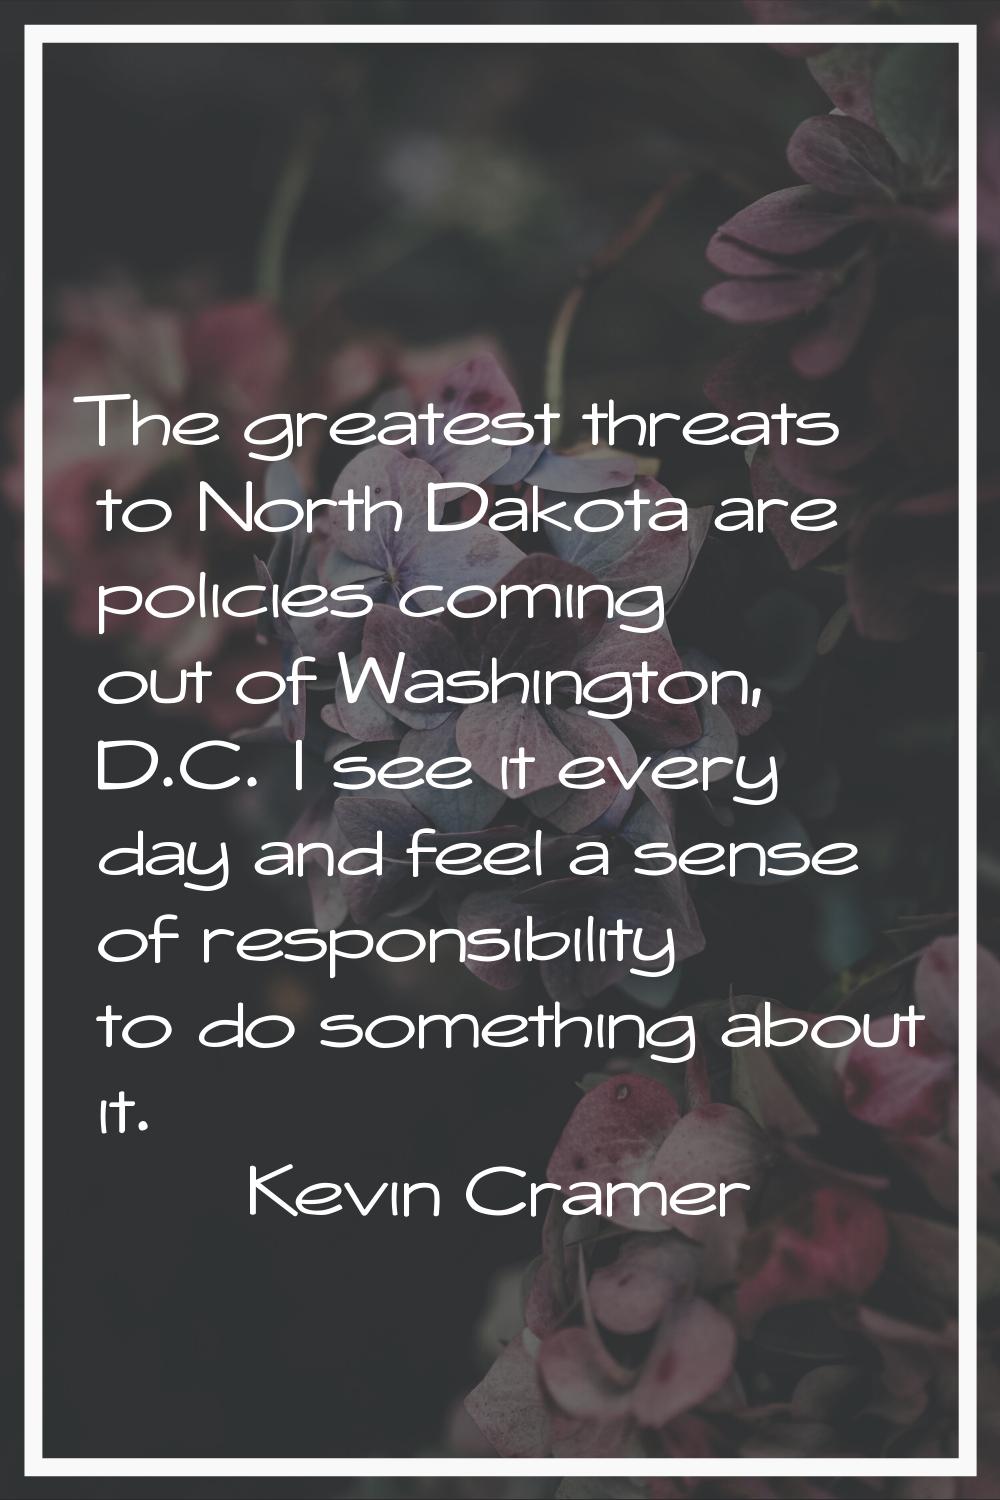 The greatest threats to North Dakota are policies coming out of Washington, D.C. I see it every day